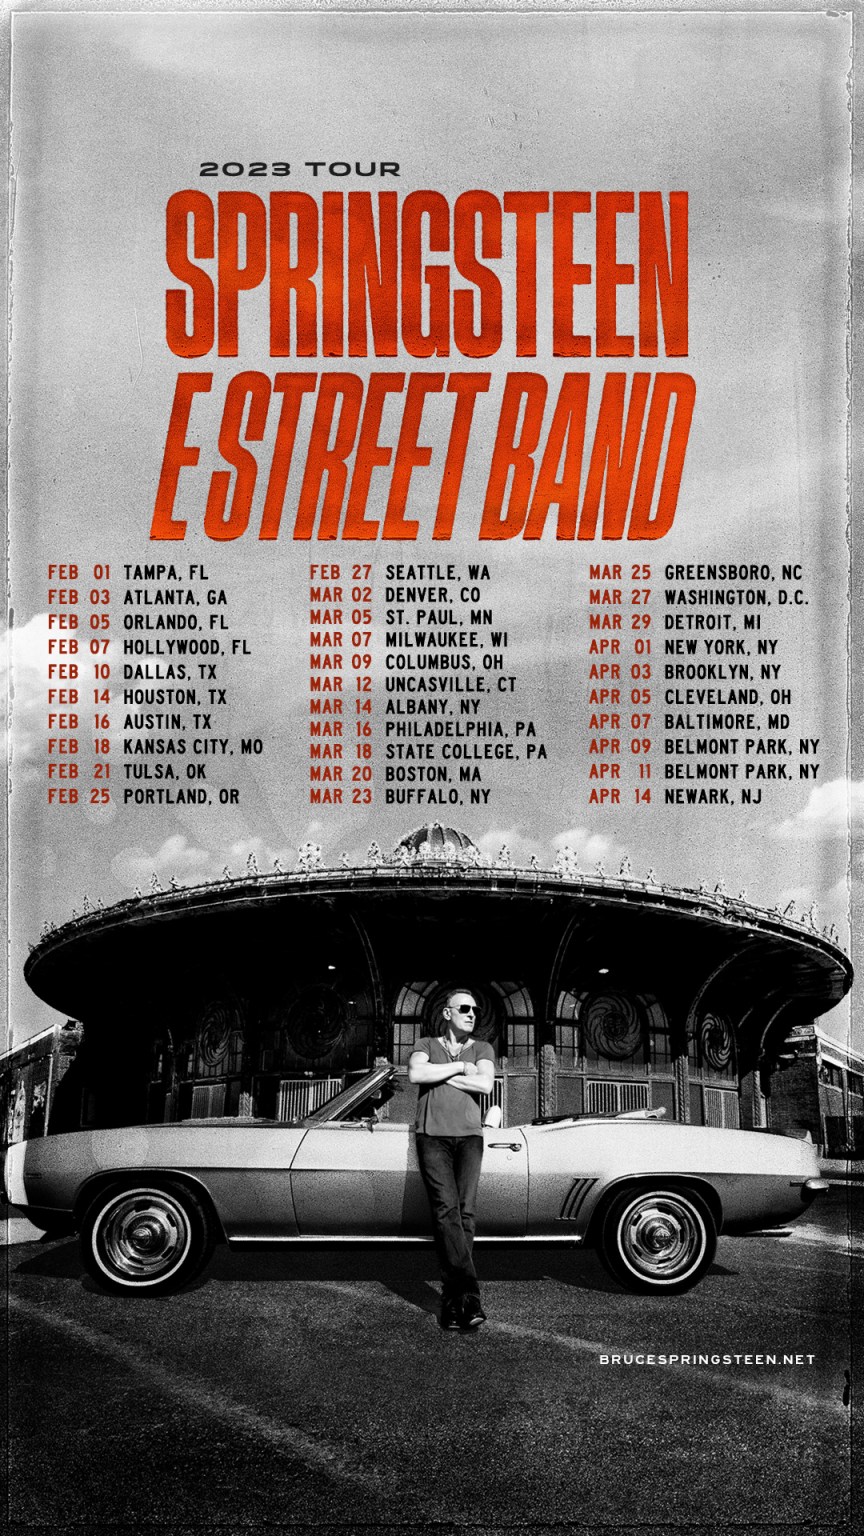 Bruce Springsteen and The E Street Band Add U.S. Dates to 2023 Tour